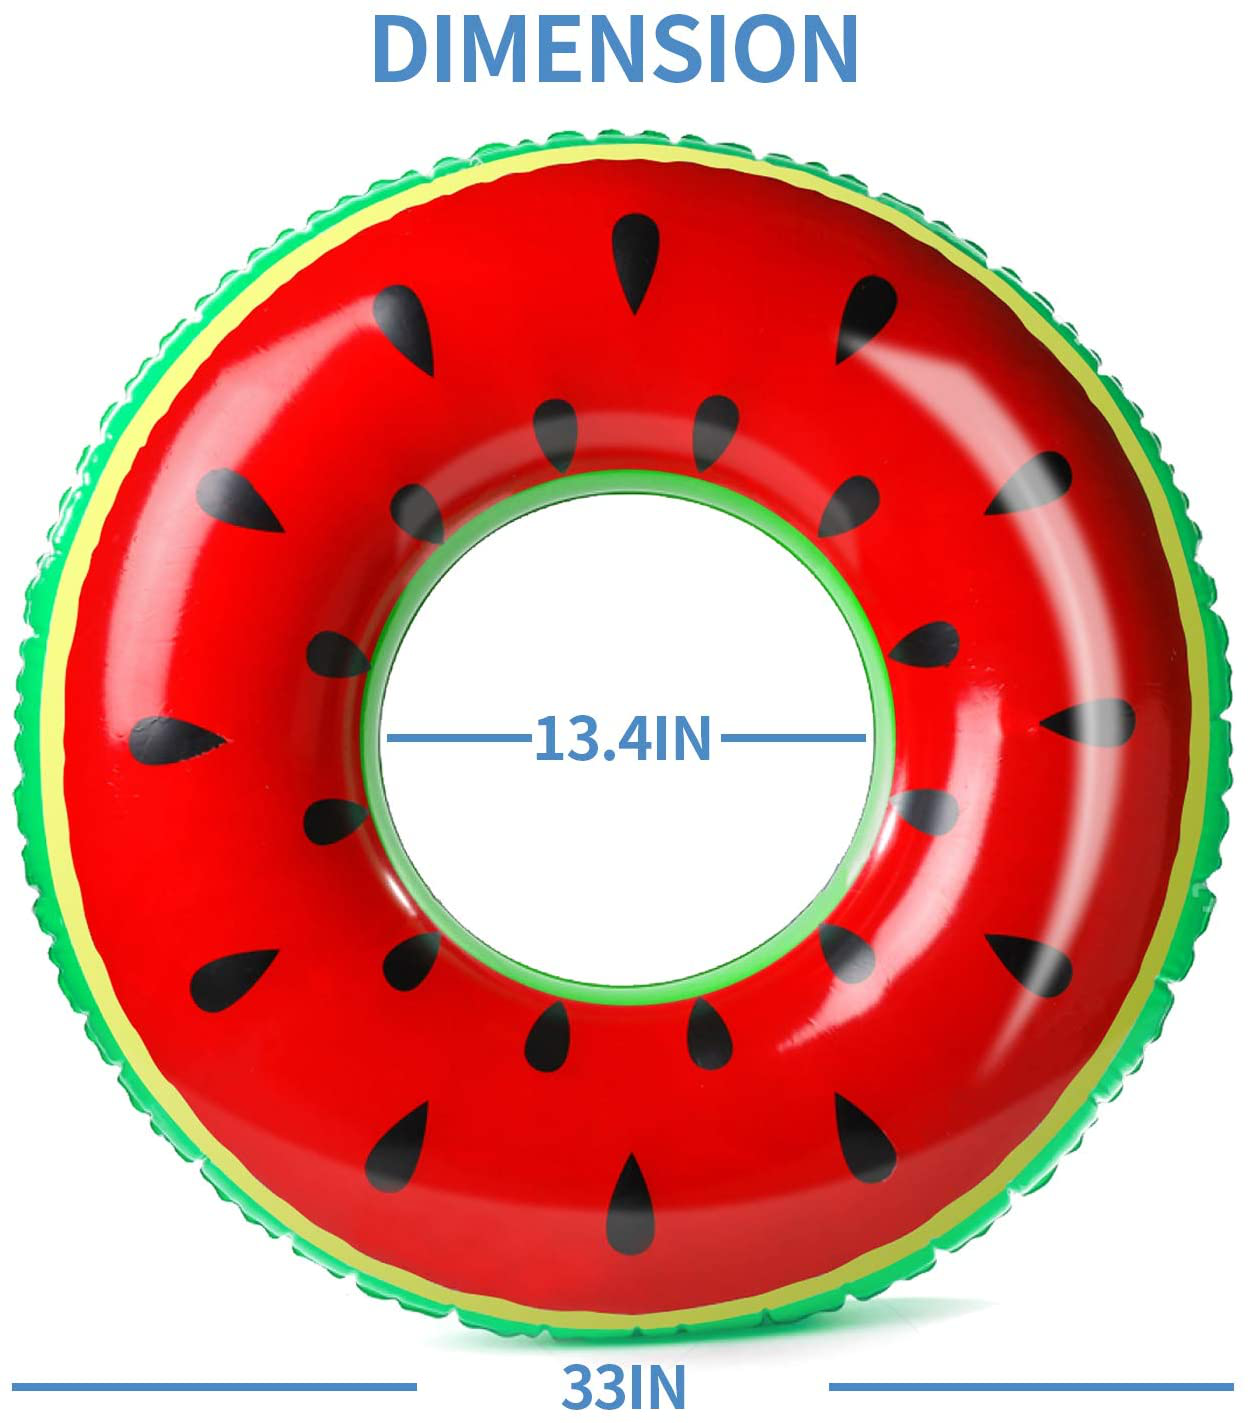 KIDPAR 4 Pcs Pool Floats for Adults Kids with 2 Pcs Cup Holders,Inflatable Large Fruit Swimming Tubes Rings Rafts for River Tubing Games,Summer Outdoor Fun,Beach Toy Lake Time 33 Inches